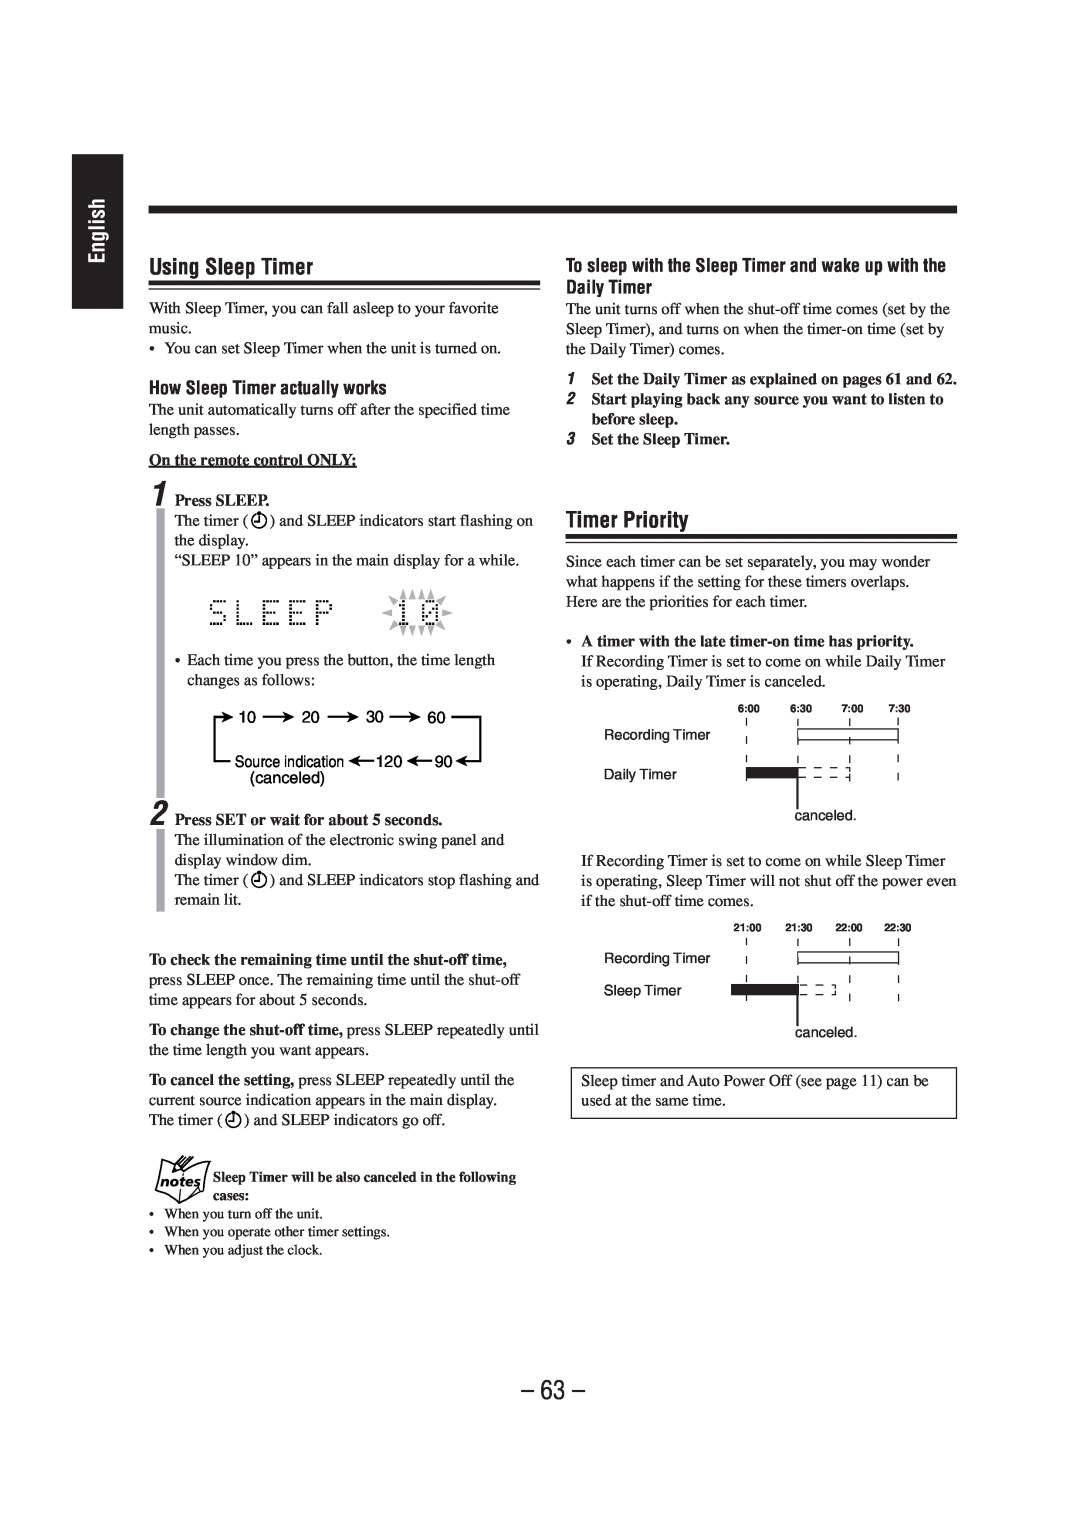 JVC LVT0900-004A, CA-UXZ7MD manual Using Sleep Timer, Timer Priority, English, How Sleep Timer actually works 